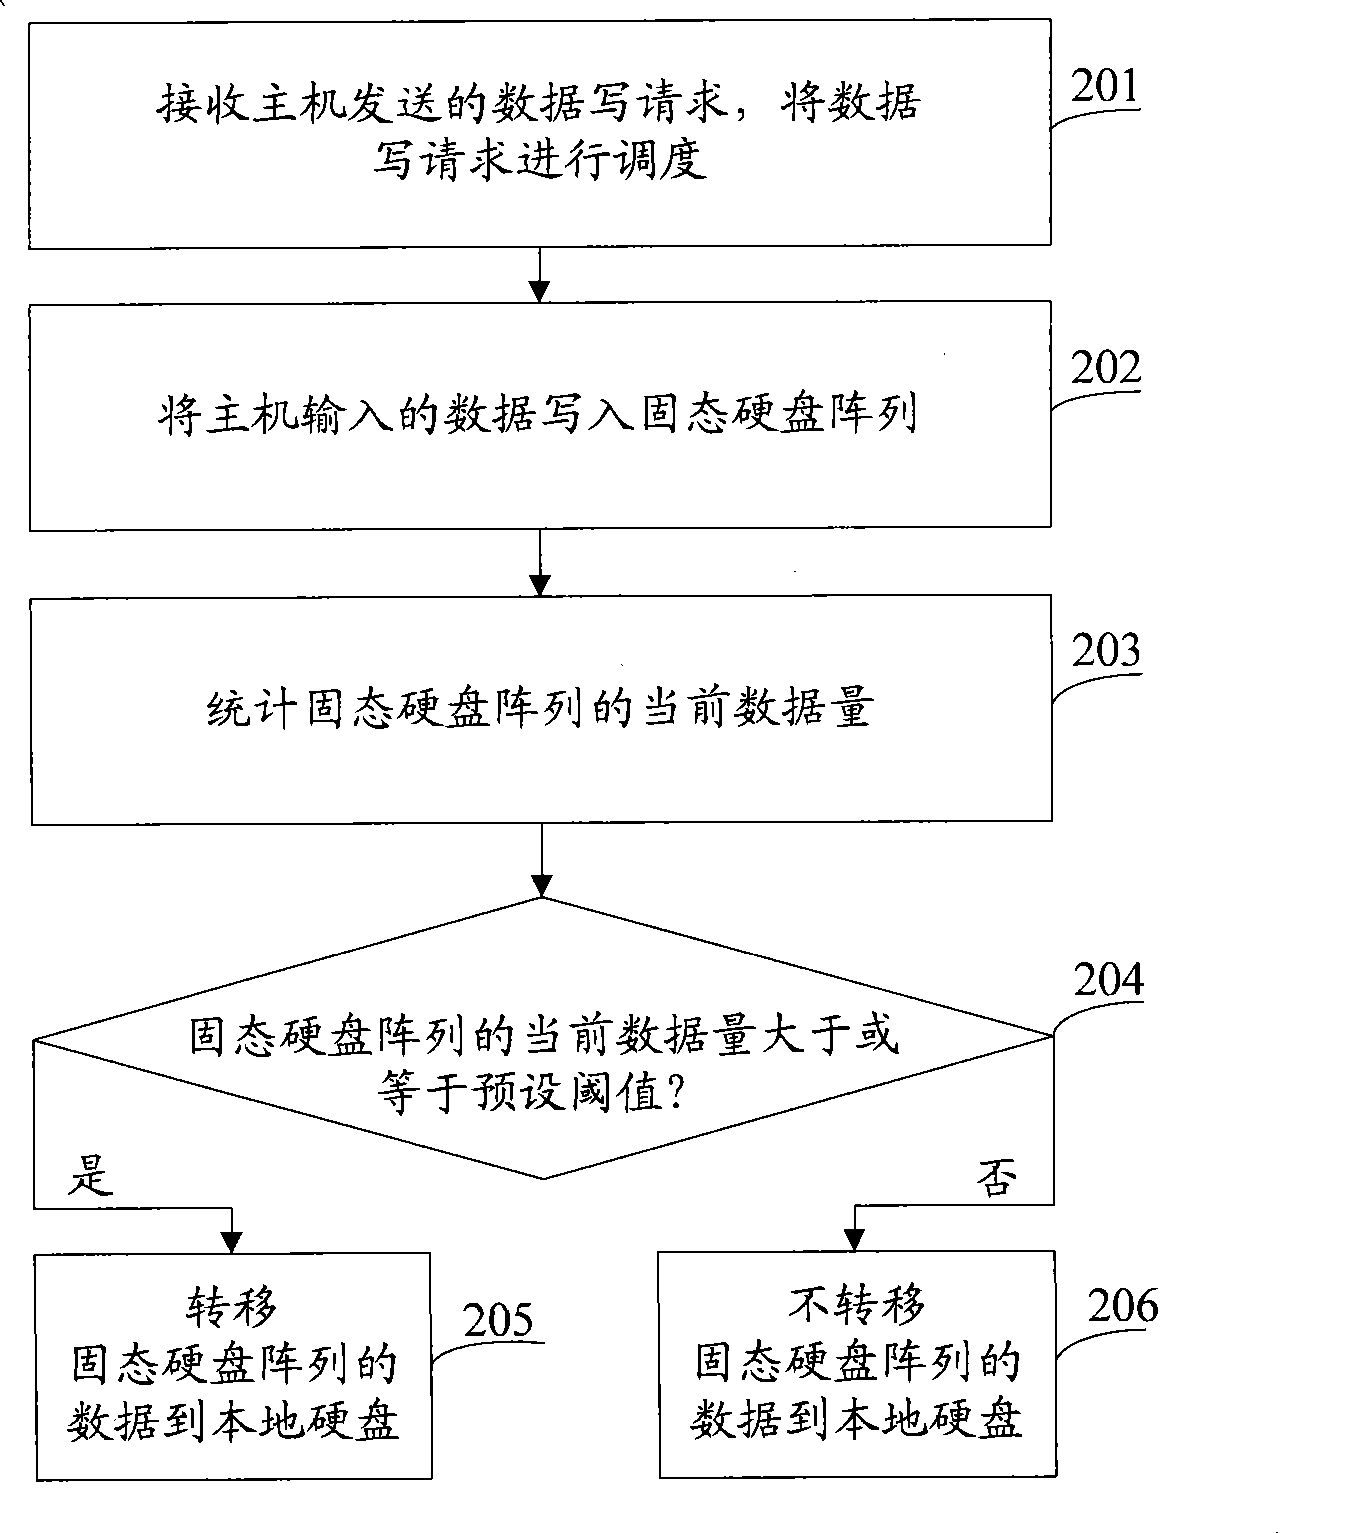 Method and system for storing and obtaining data